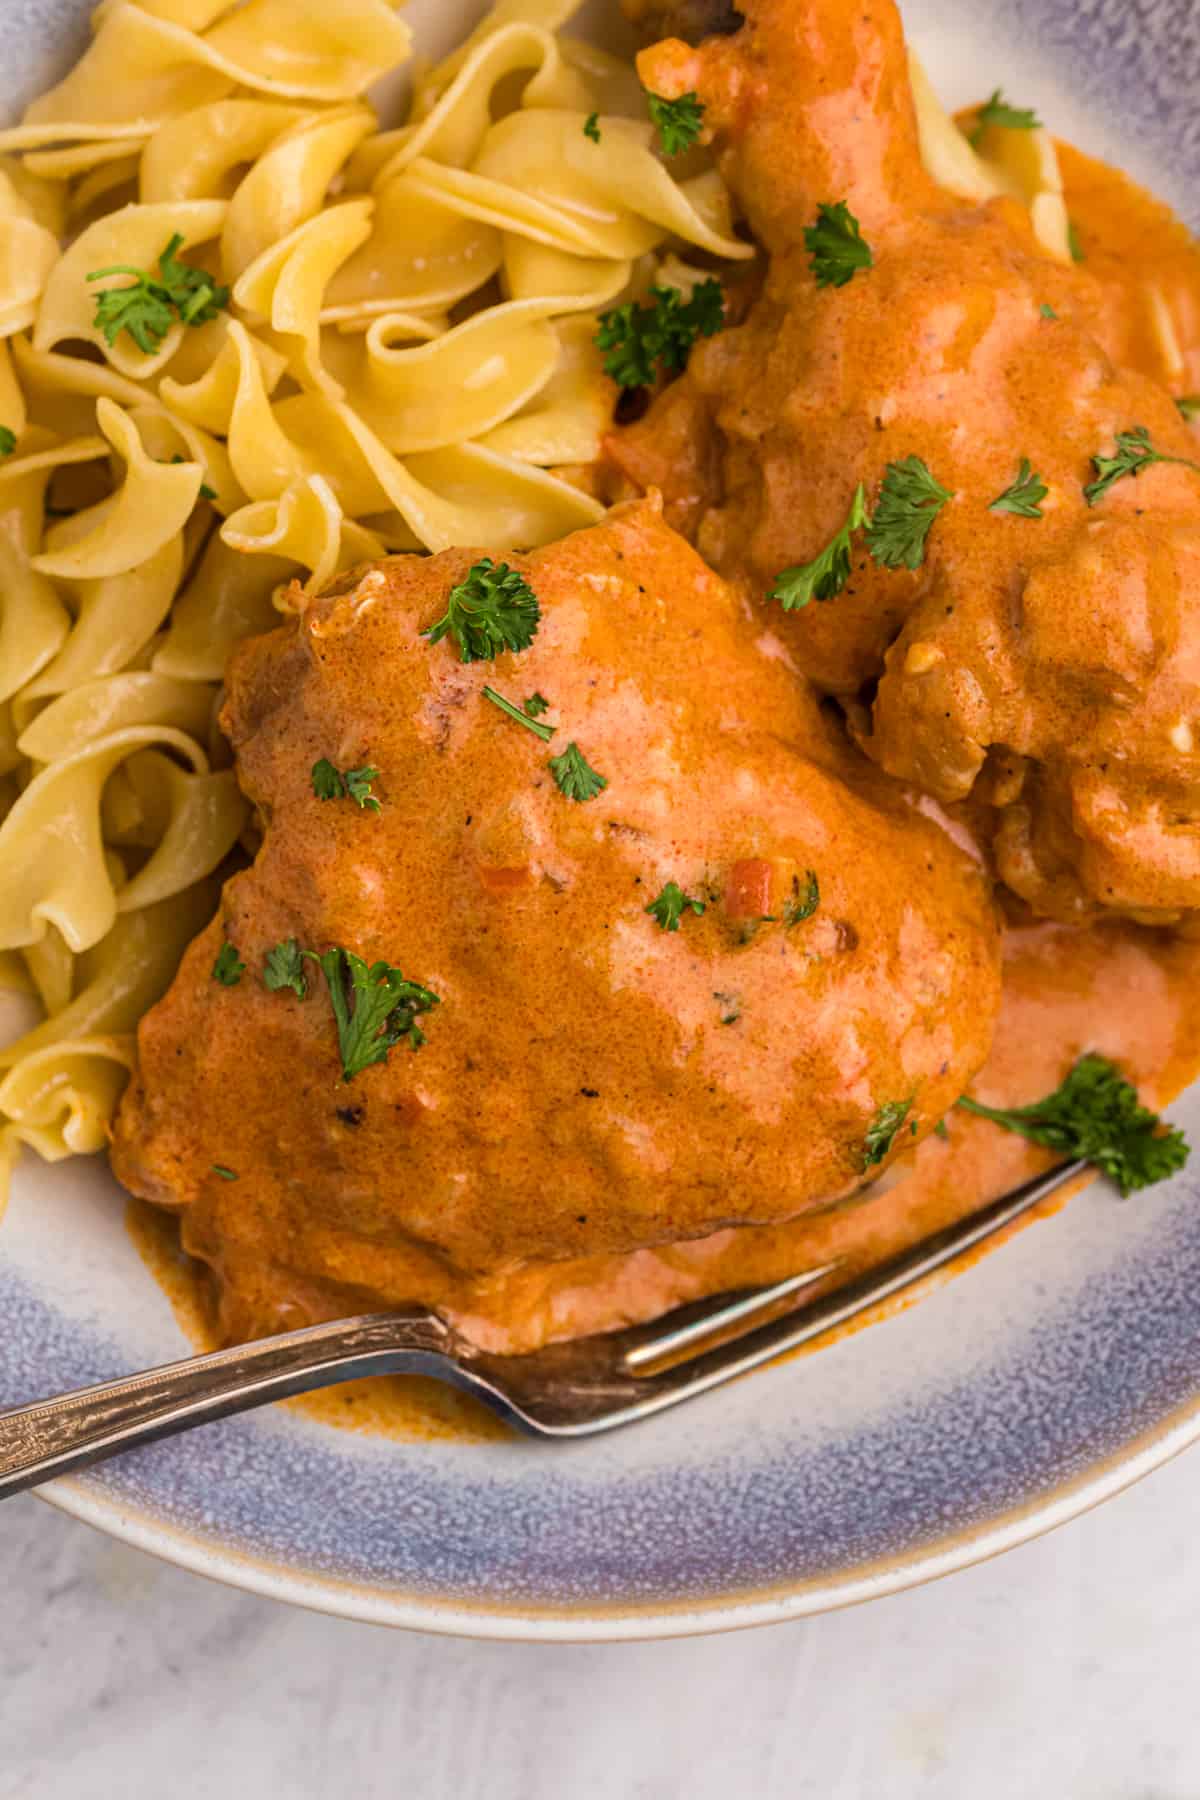 Chicken paprikash is plated with egg noodles.